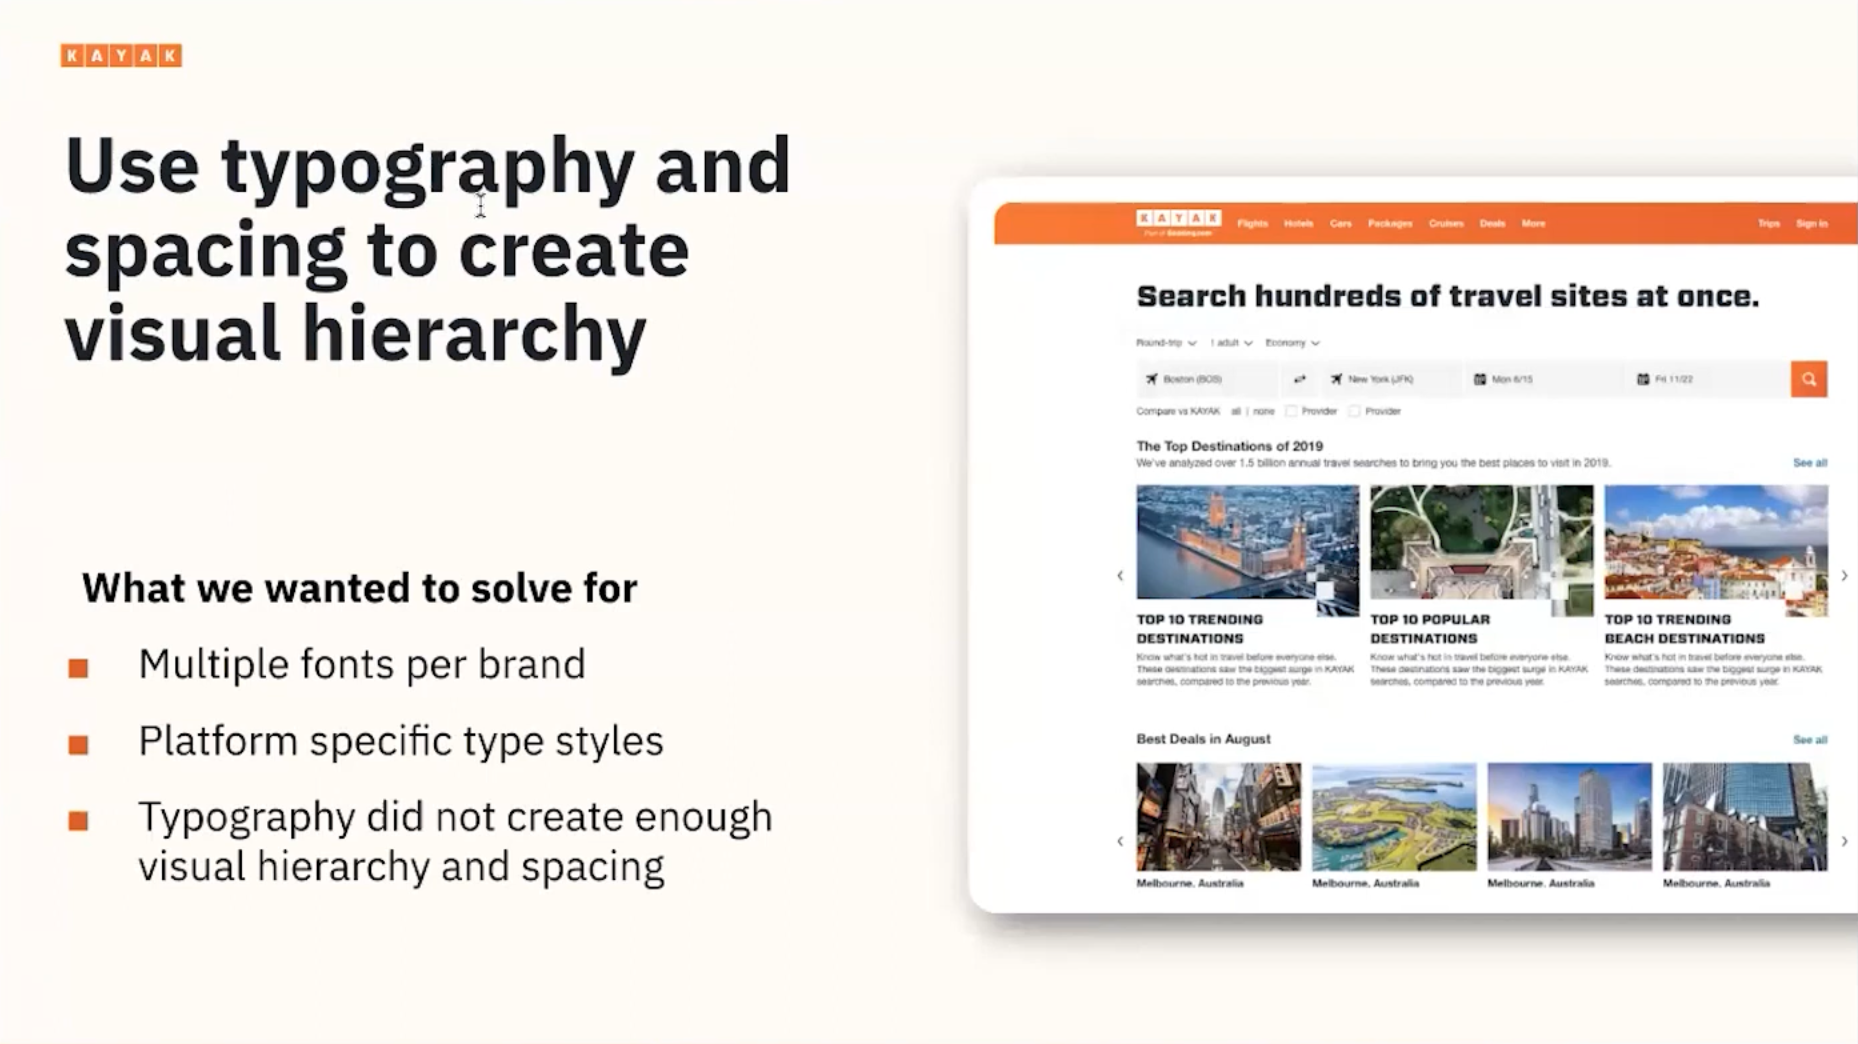 Use typography and spacing to create visual hierarchy. Issues to sole: multiple fonts per brand, platform specific type styles, typography did not create enough visual hierarchy.